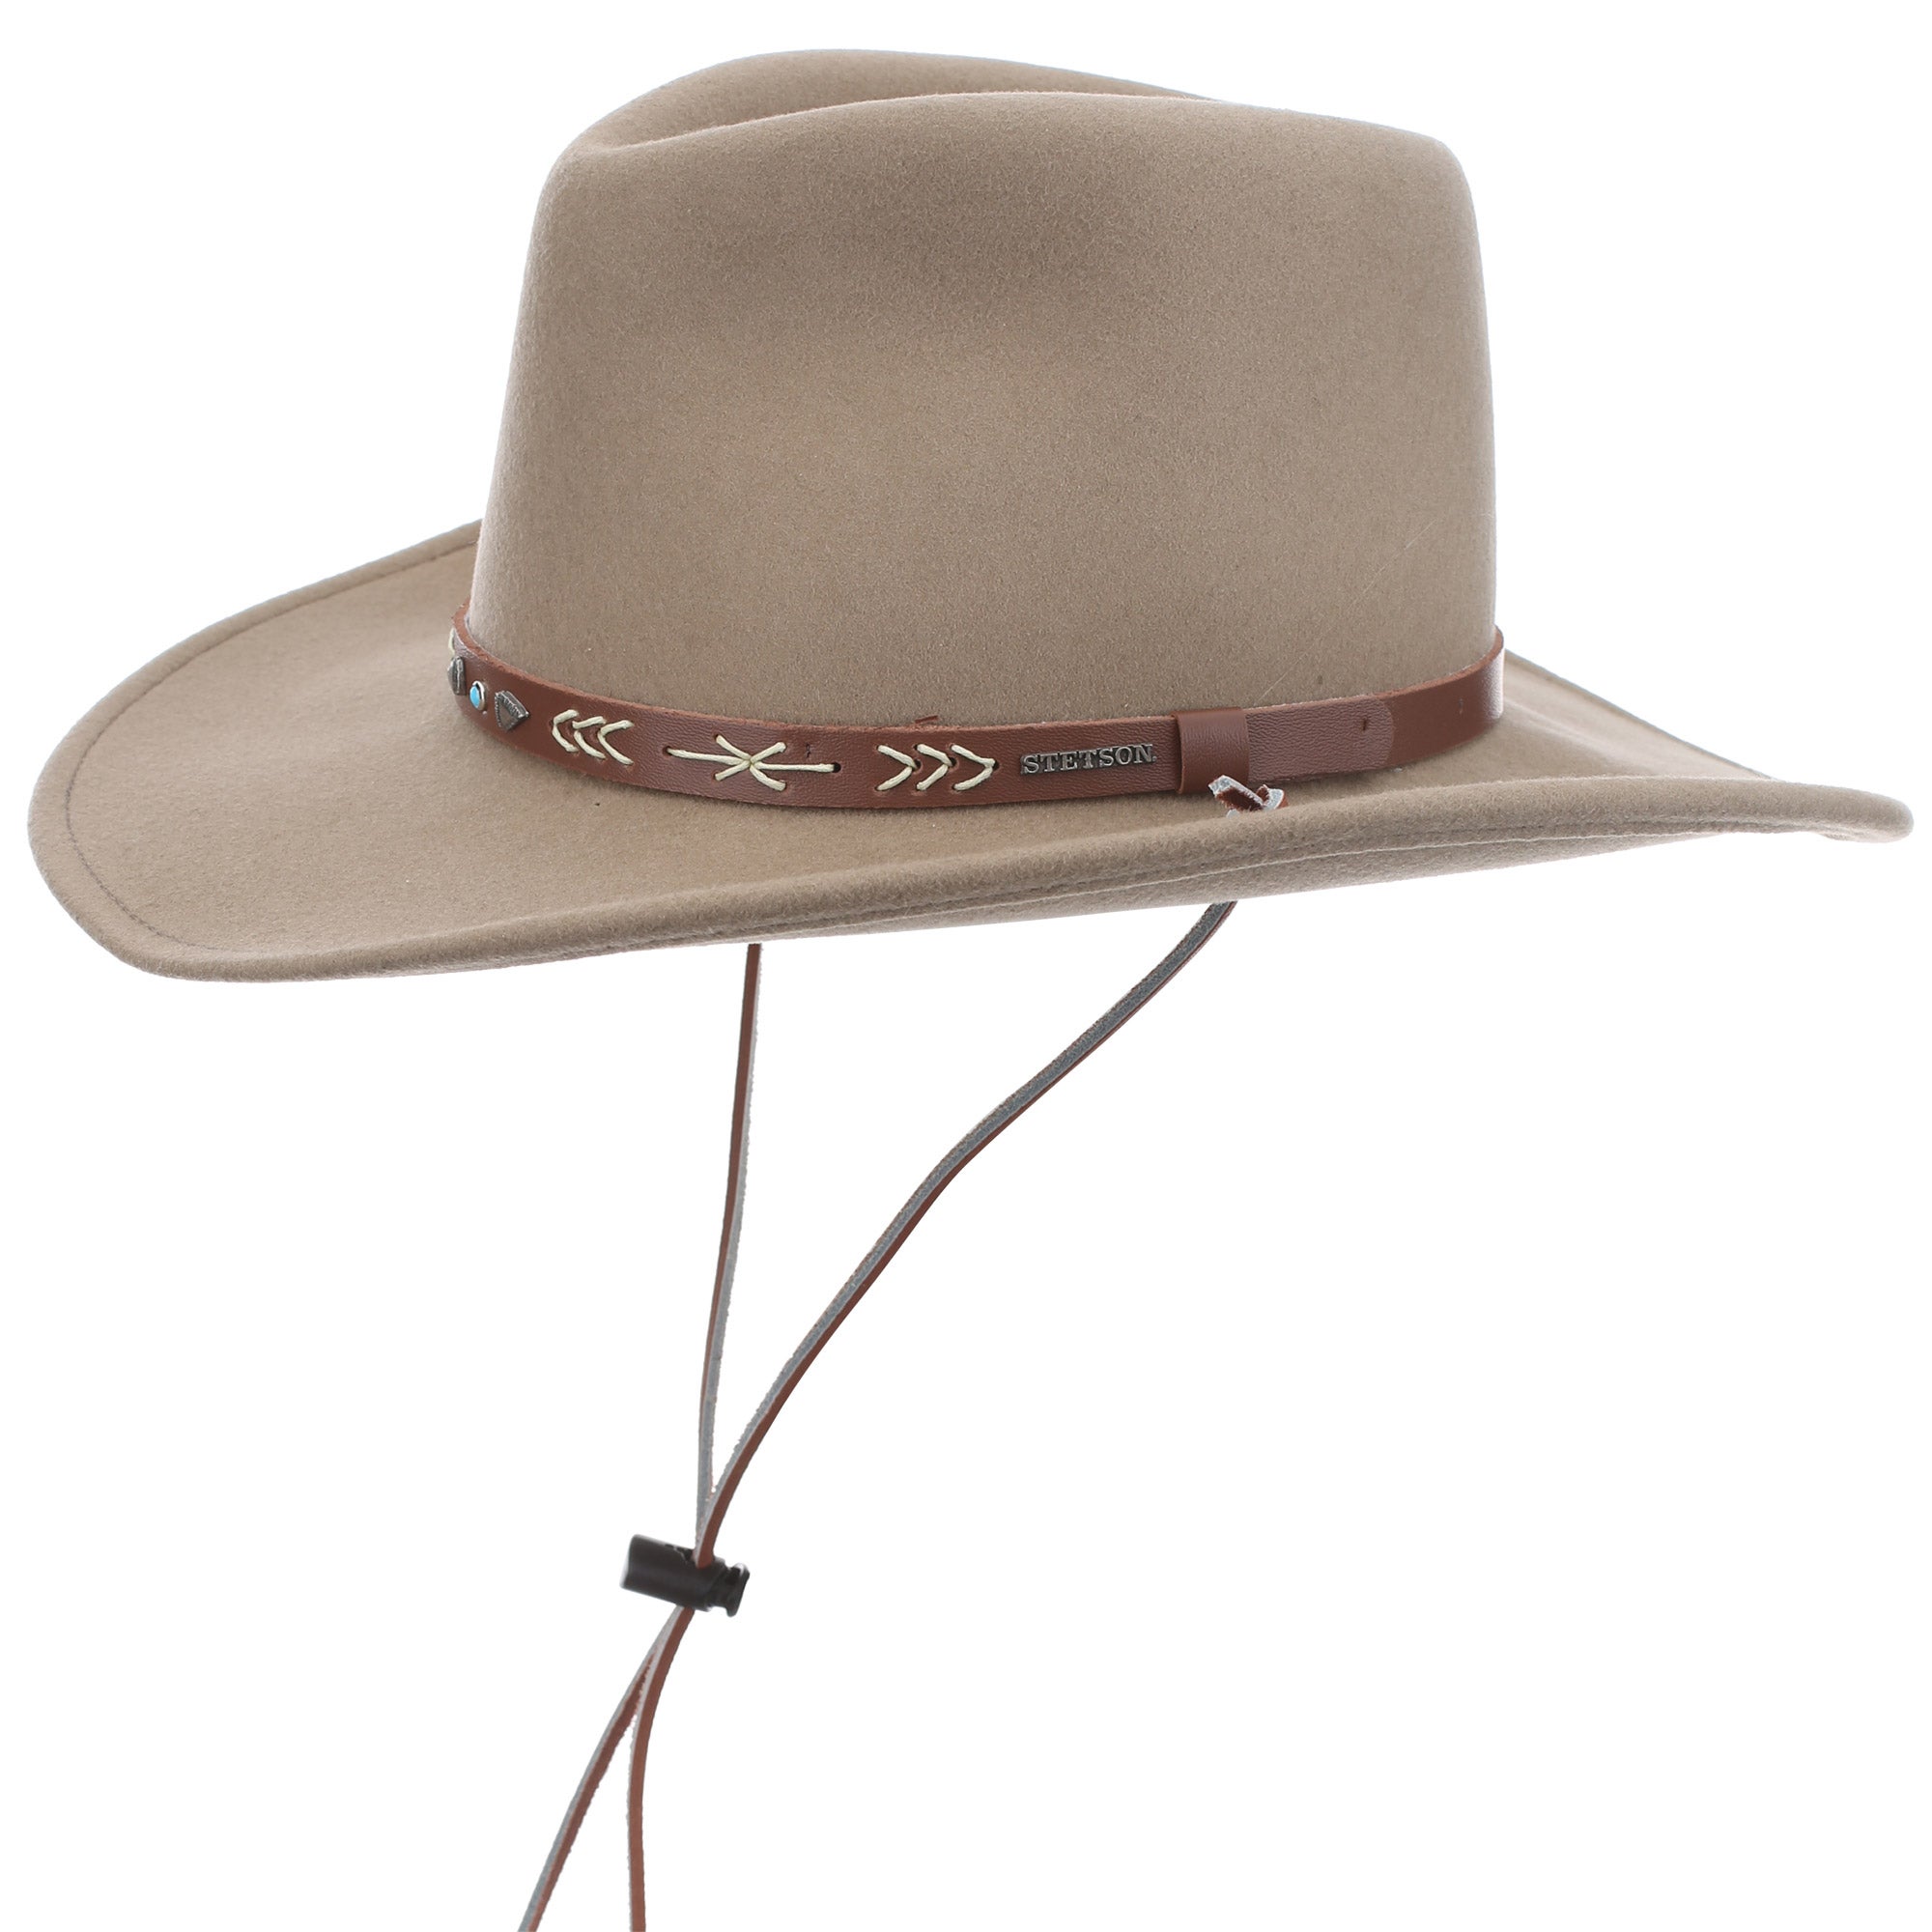 Stetson Santa Fe Crushable Outdoor Hat w/Chin Strap - Riding Warehouse